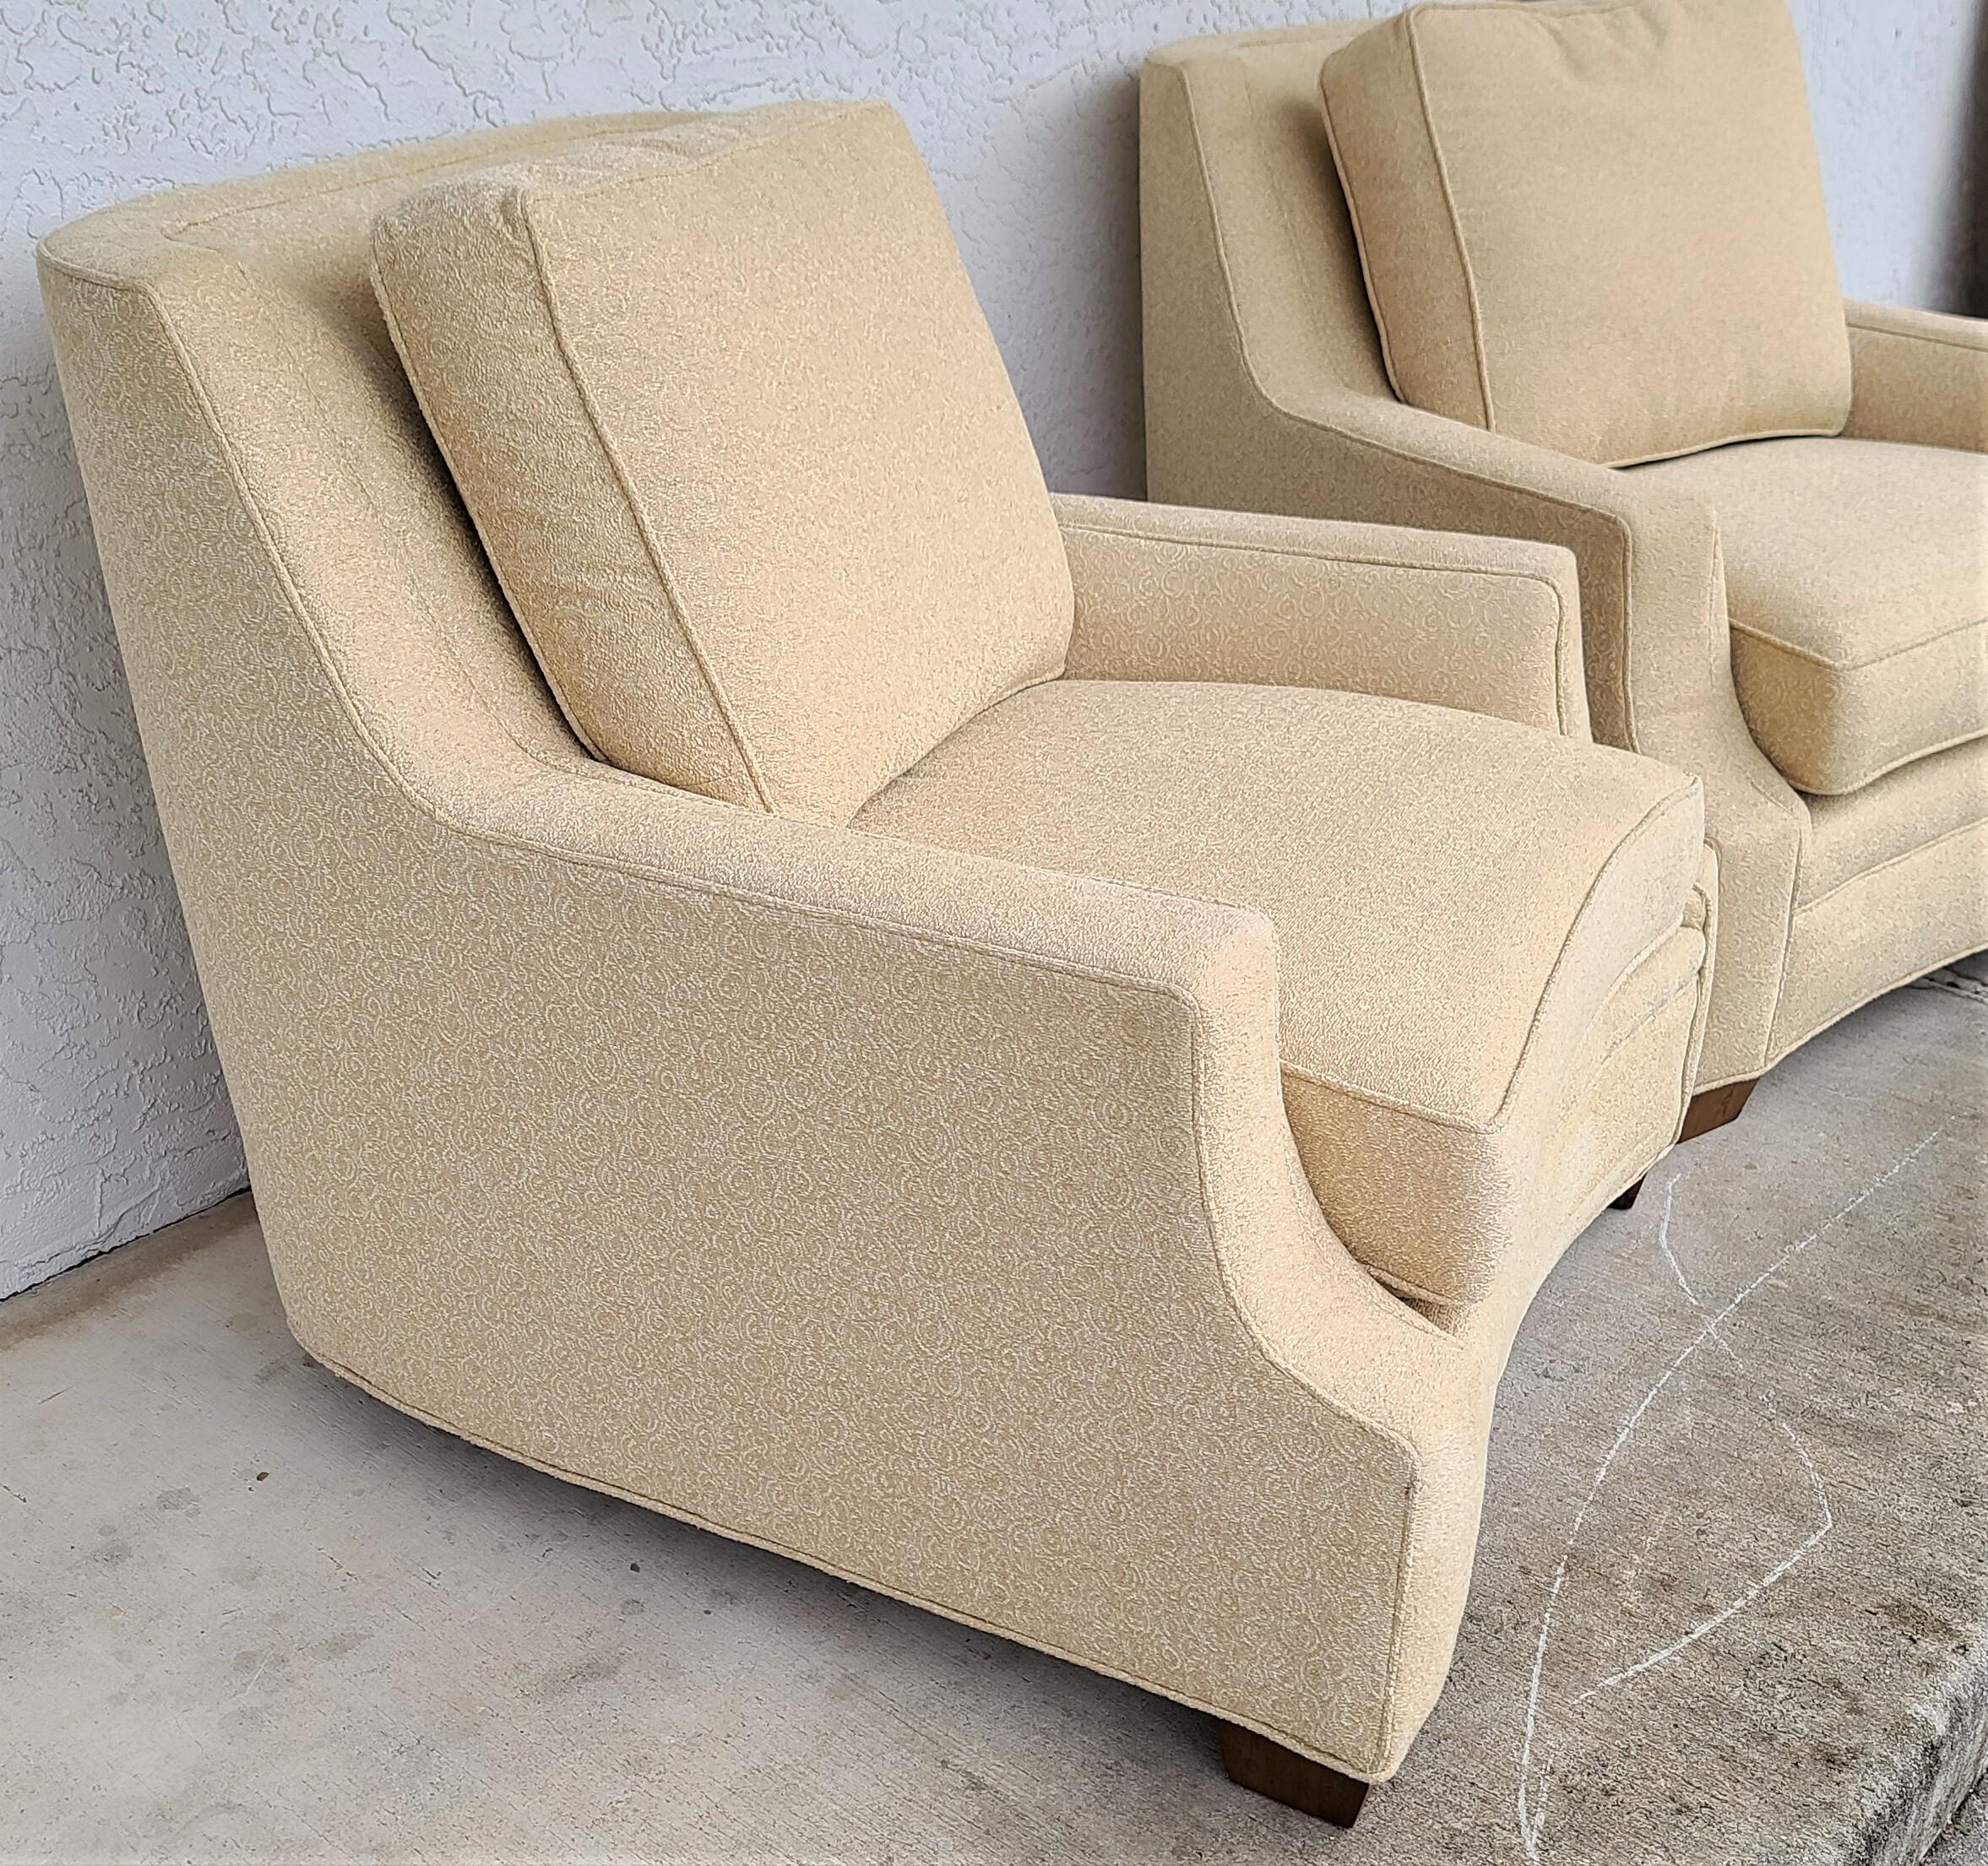 American Oversized Beige Lounge Chairs by Century Furniture Co - A Pair For Sale